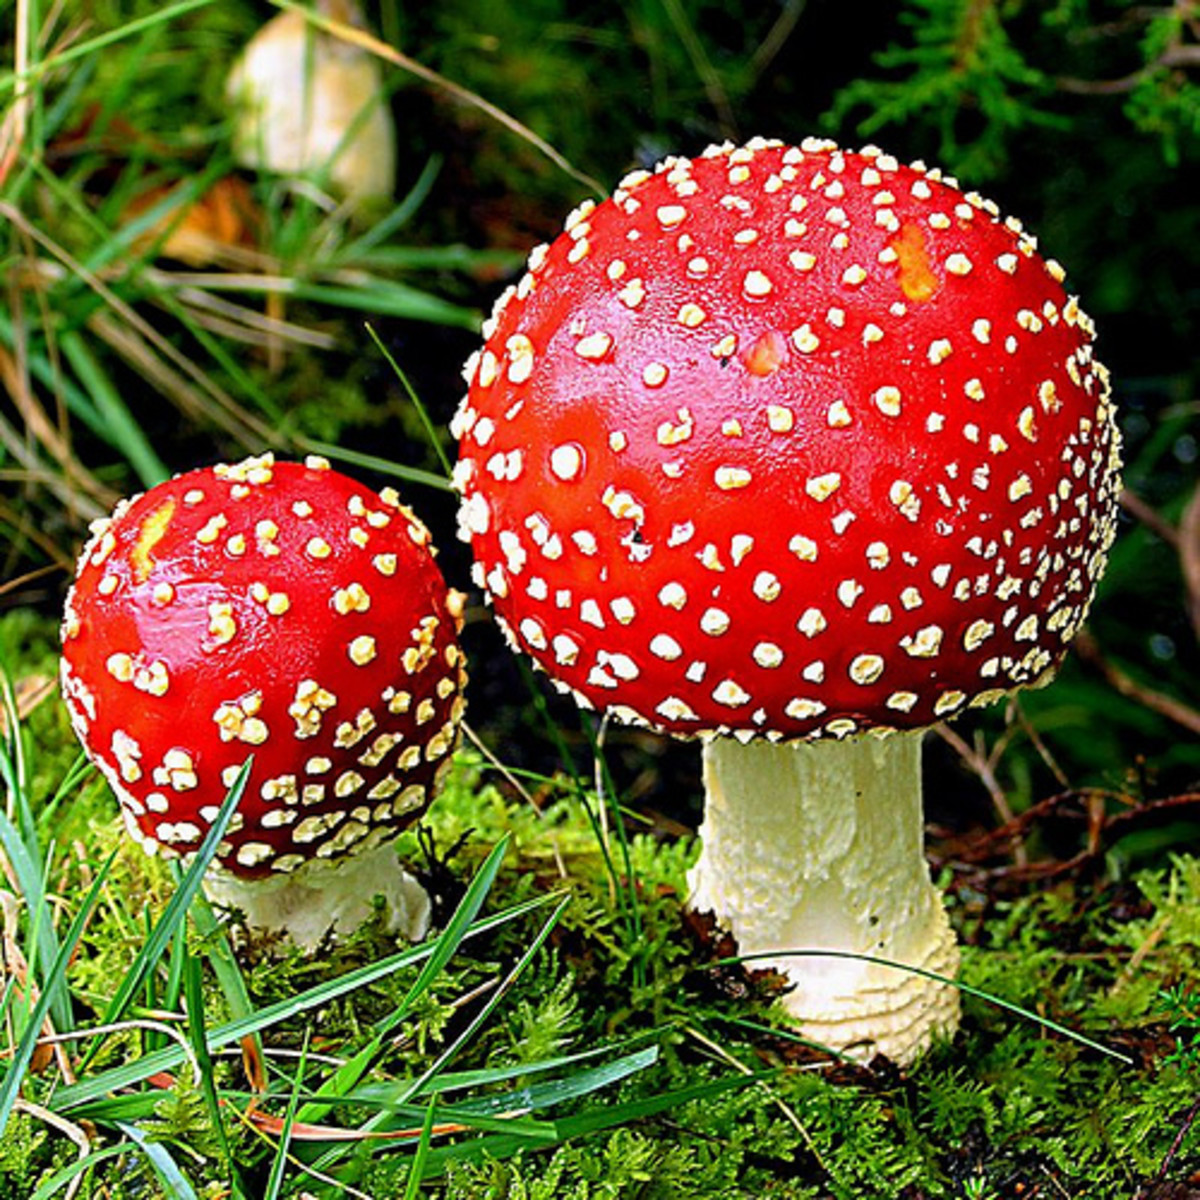 In the nineteenth century, the compound muscarine was isolated from the psychoactive mushroom Amanita muscaria.